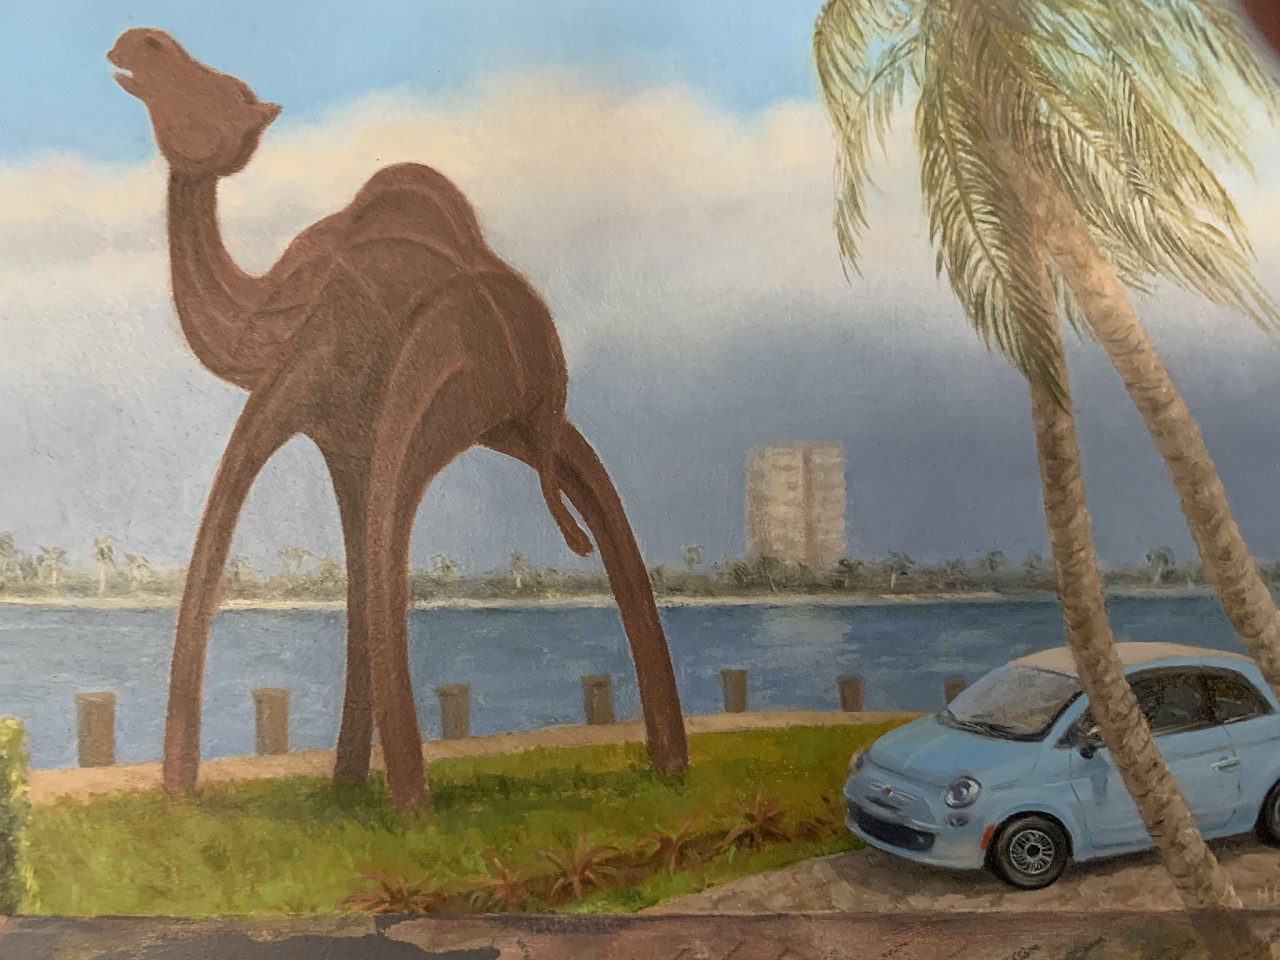 Hilary Harkness, Untitled (Fiat and Camel)
2018, Oil on Canvas